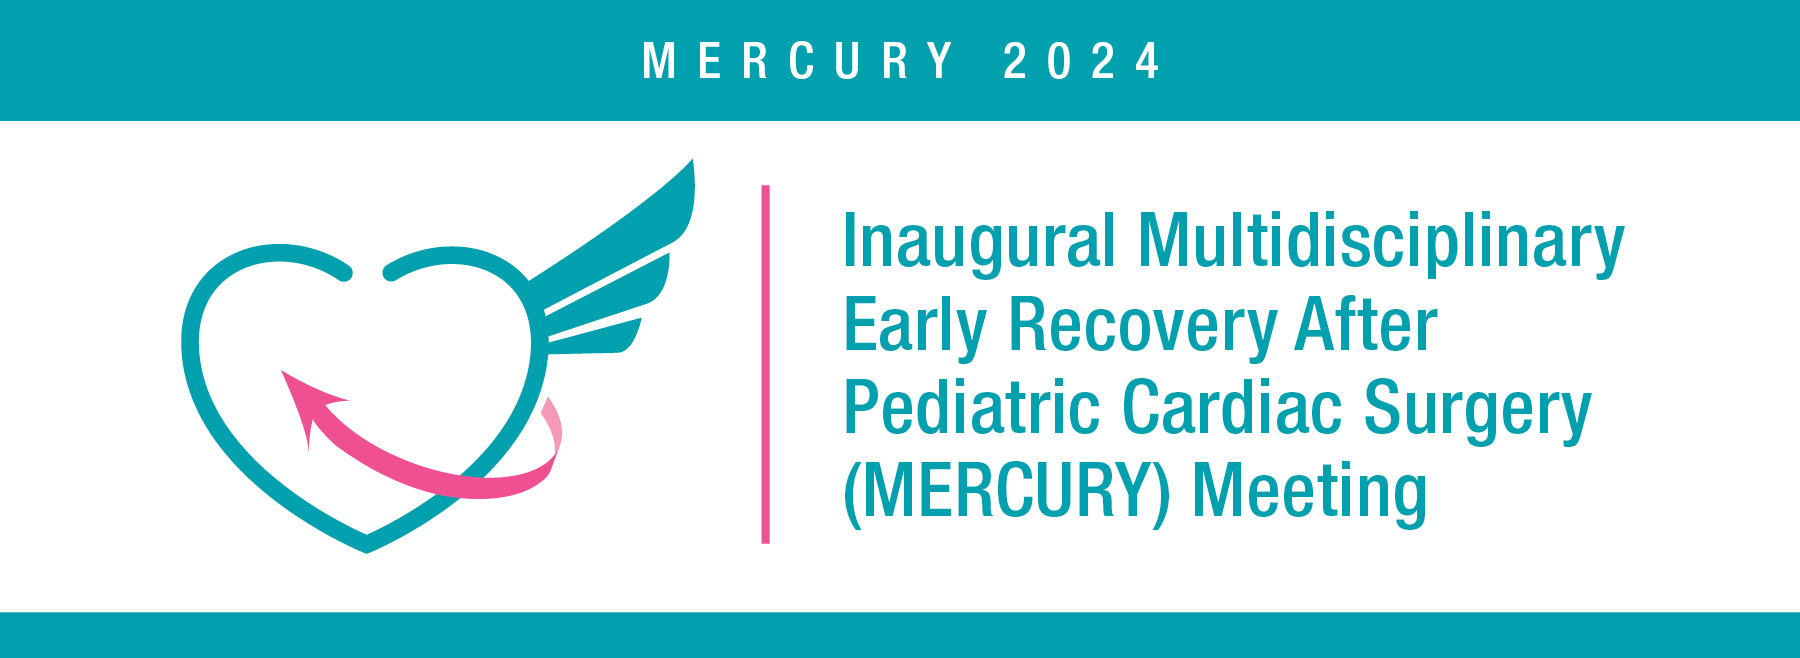 Multidisciplinary Early Recovery After Congenital Heart Surgery (MERCURY) Meeting Banner